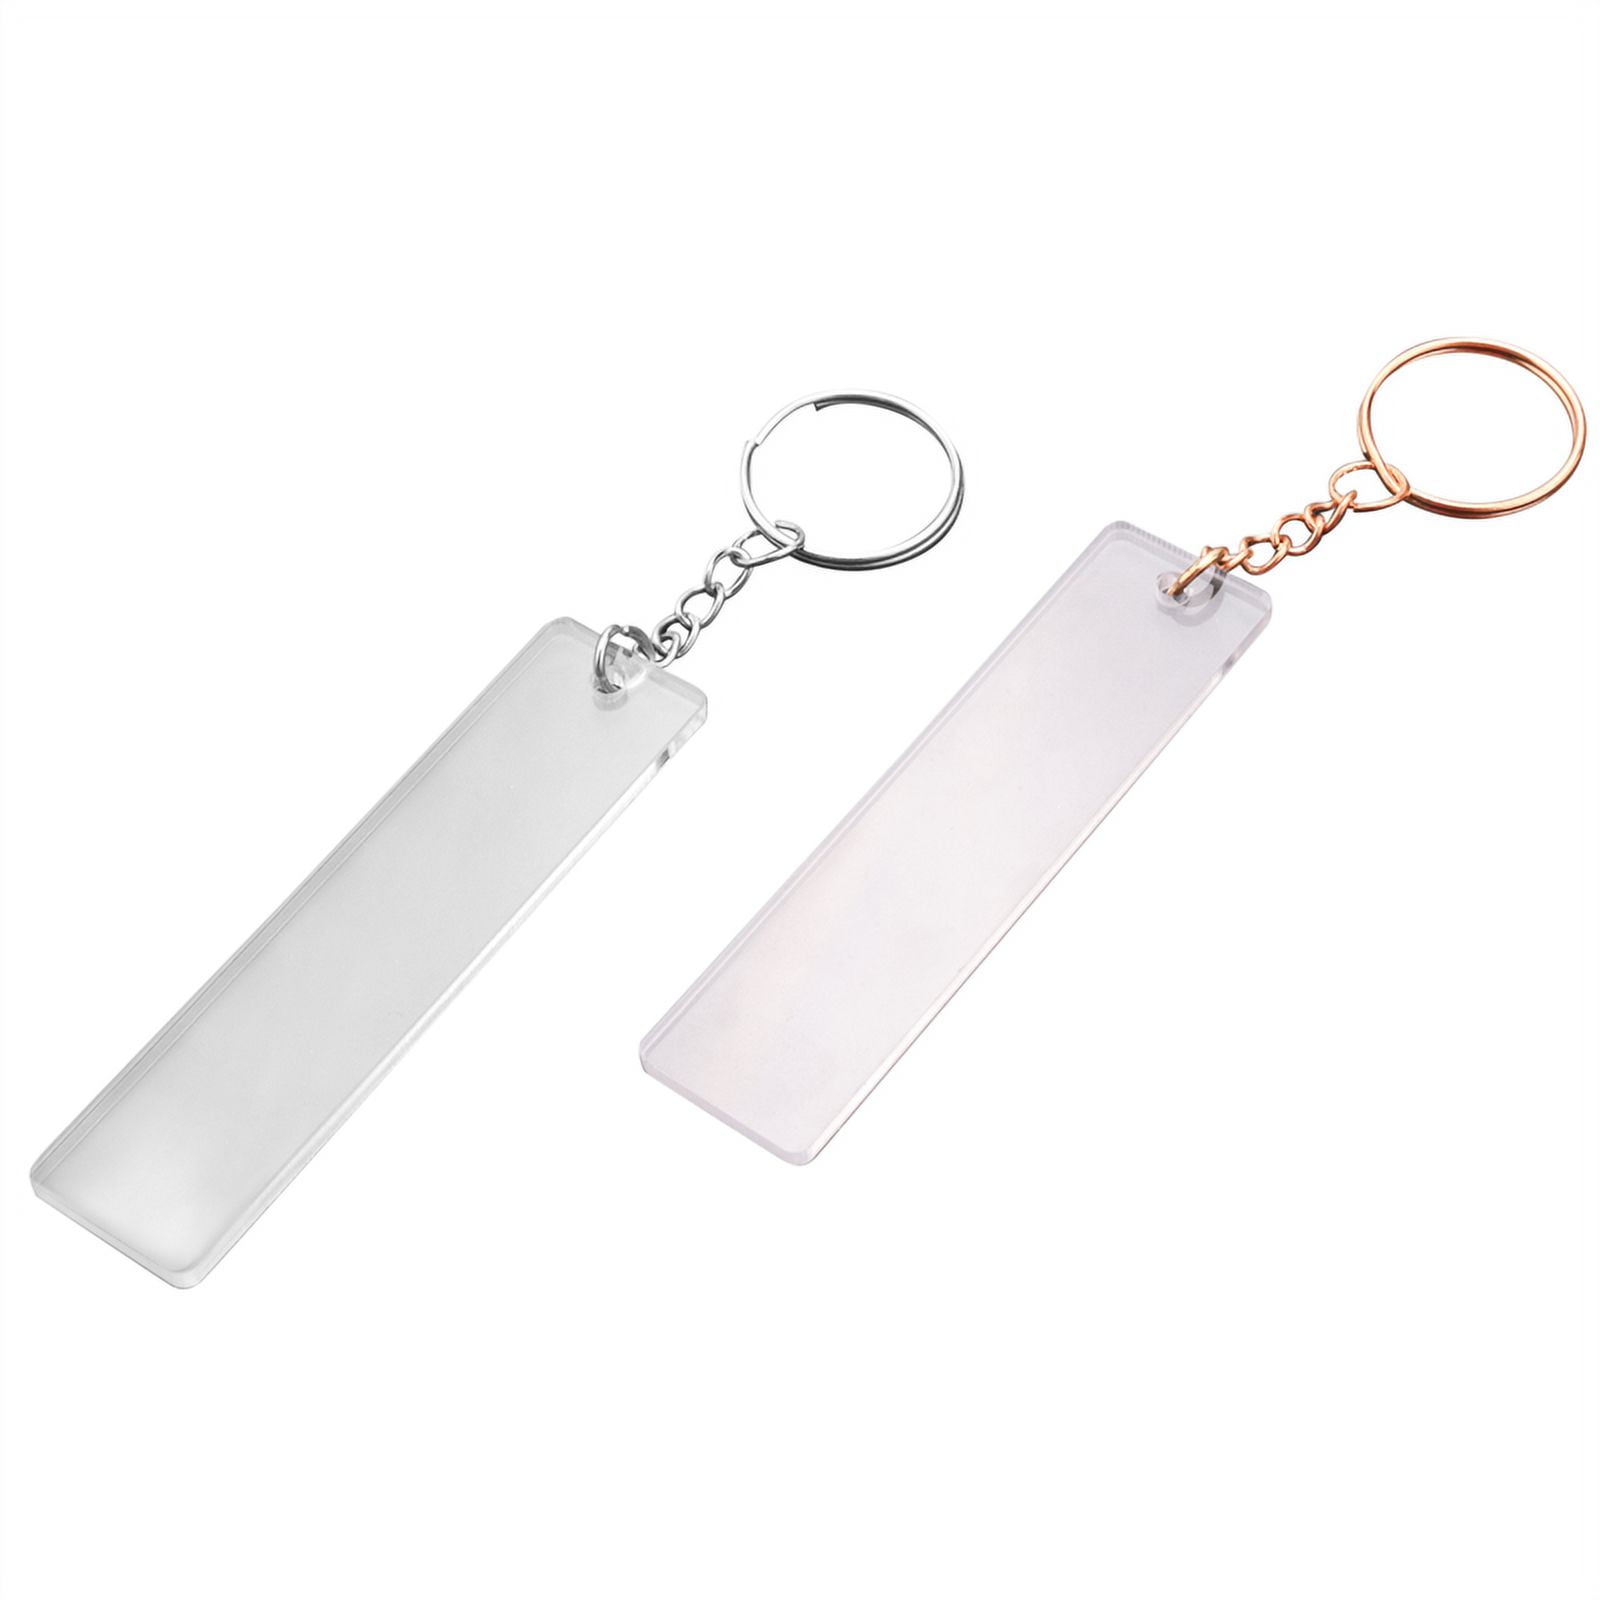 150pcs Clear Blank Keychains Kit Acrylic Keychain Blanks Key Chain Rings  and Jump Rings for Crafting Vinyl Projects DIY Supplies